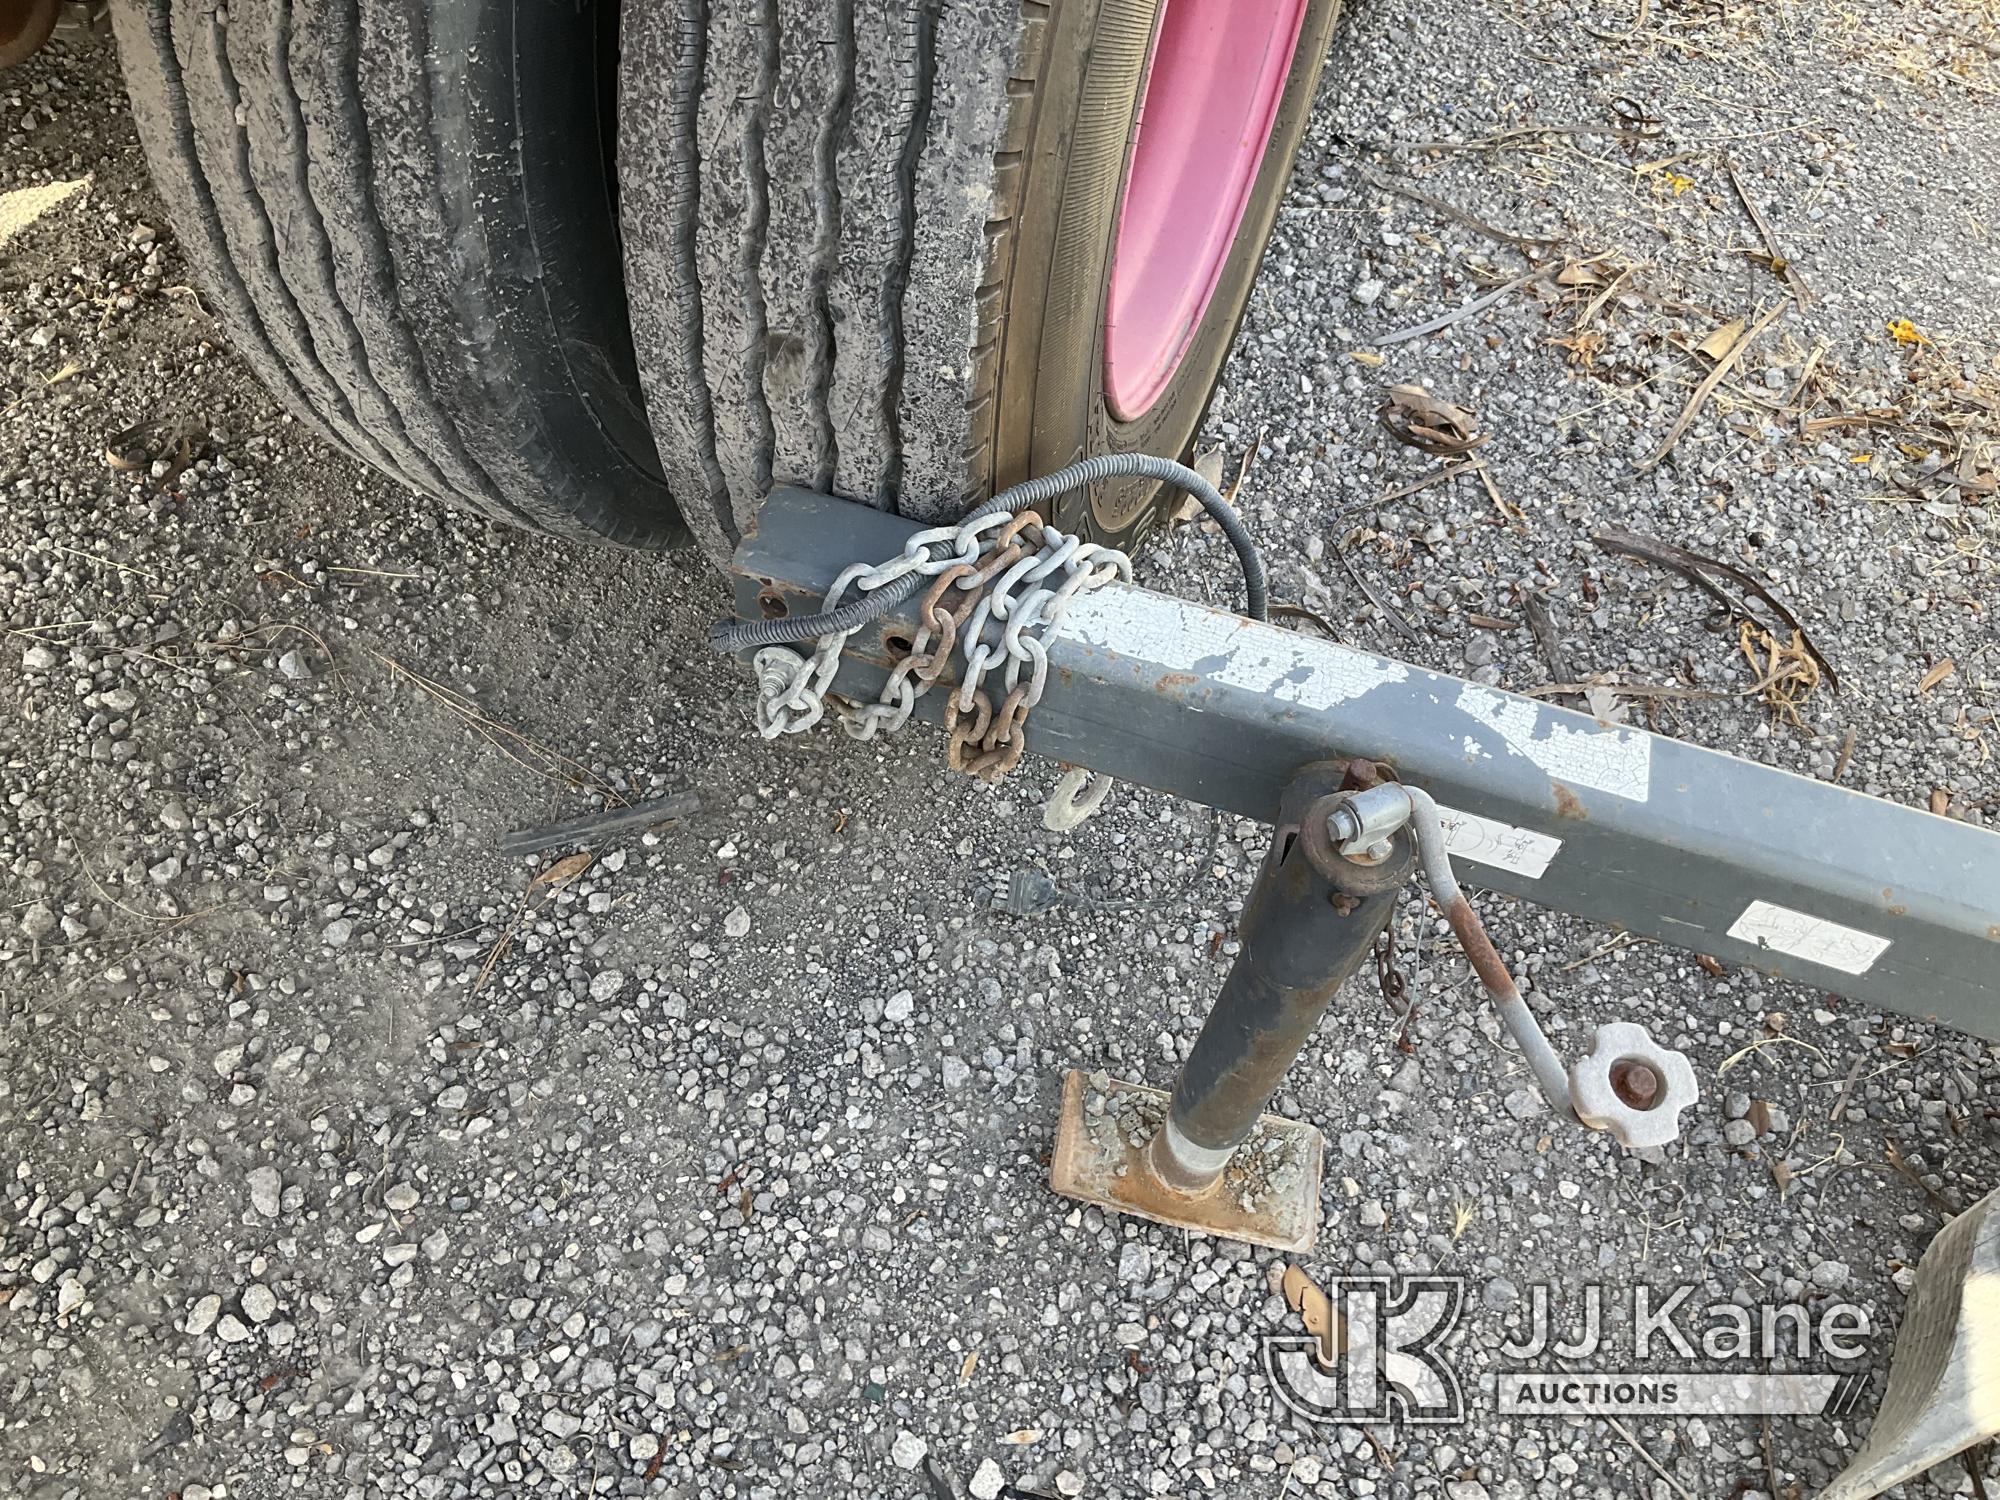 (Jurupa Valley, CA) Portable Light Tower Not Running, Missing Hitch, Bill of Sale Only